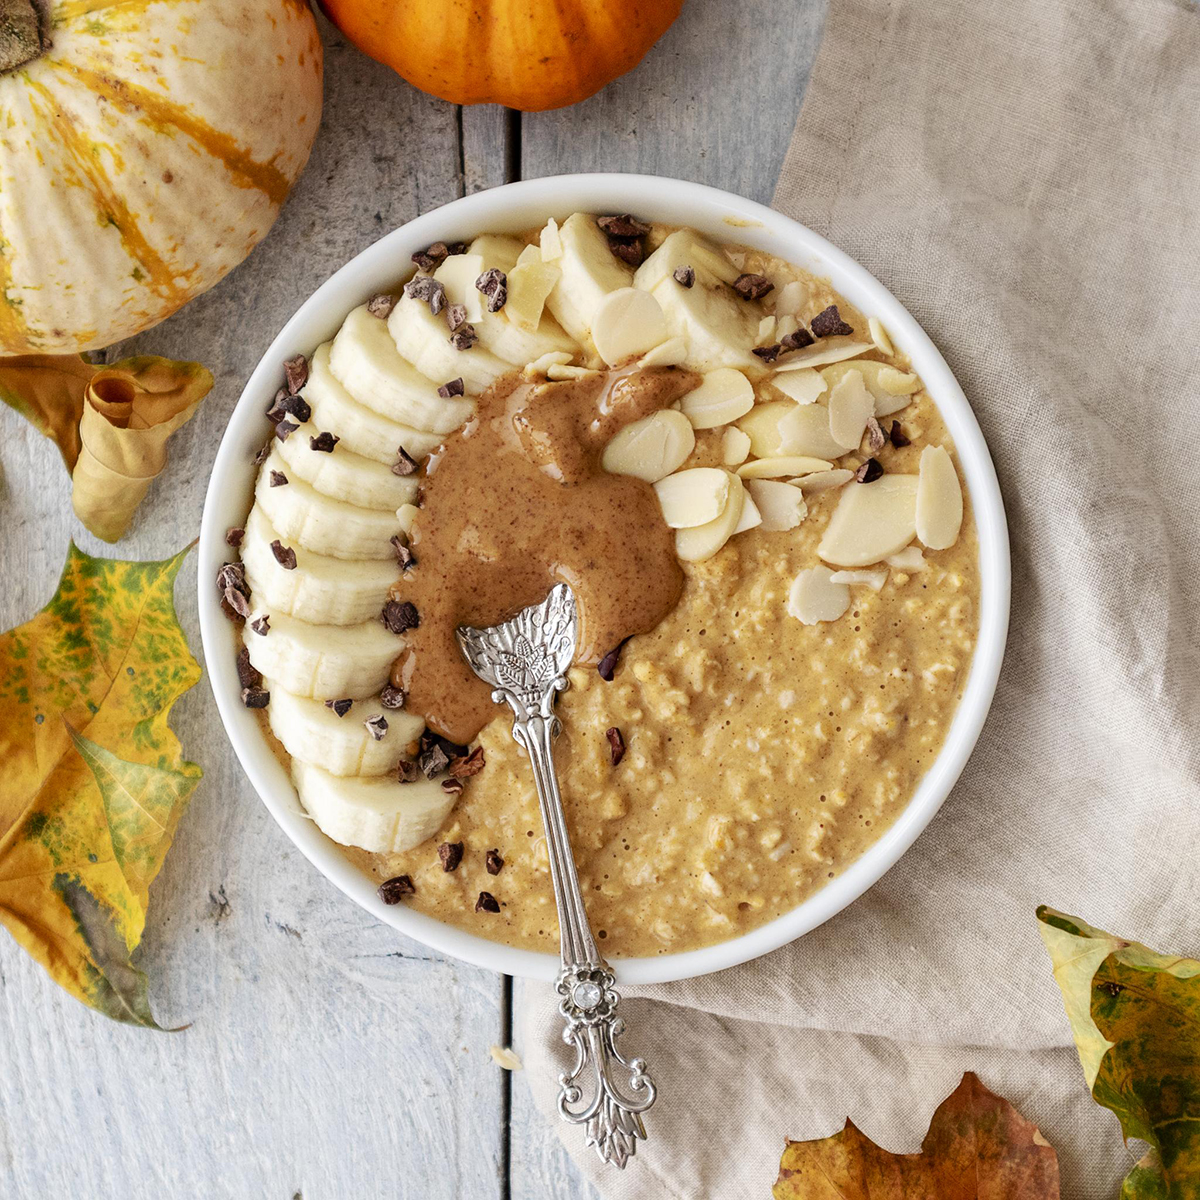 a bowl filled with pumpkin spice porridge and topped with fresh fruits such as banana, nuts, cacao nibs and nut butter. A spoon is sitting on top of the bowl.